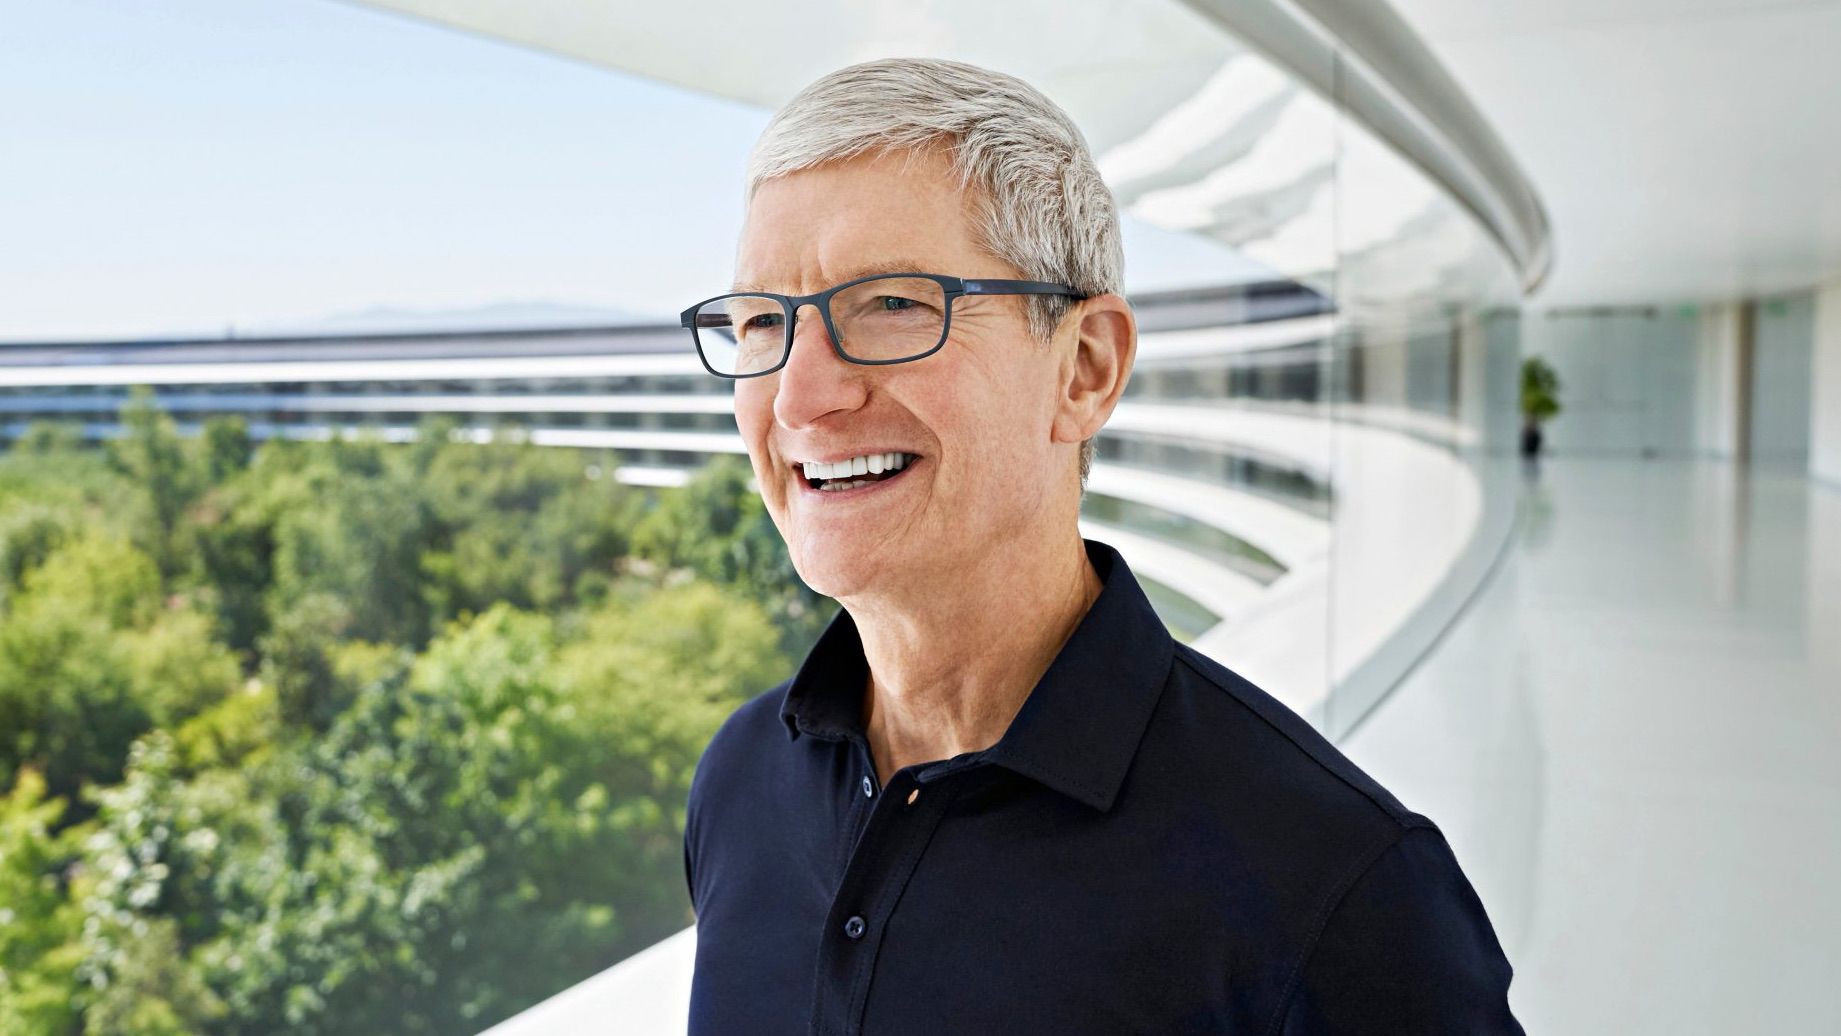 Apple ceo appreciates 9 yr old indian girl for her app development